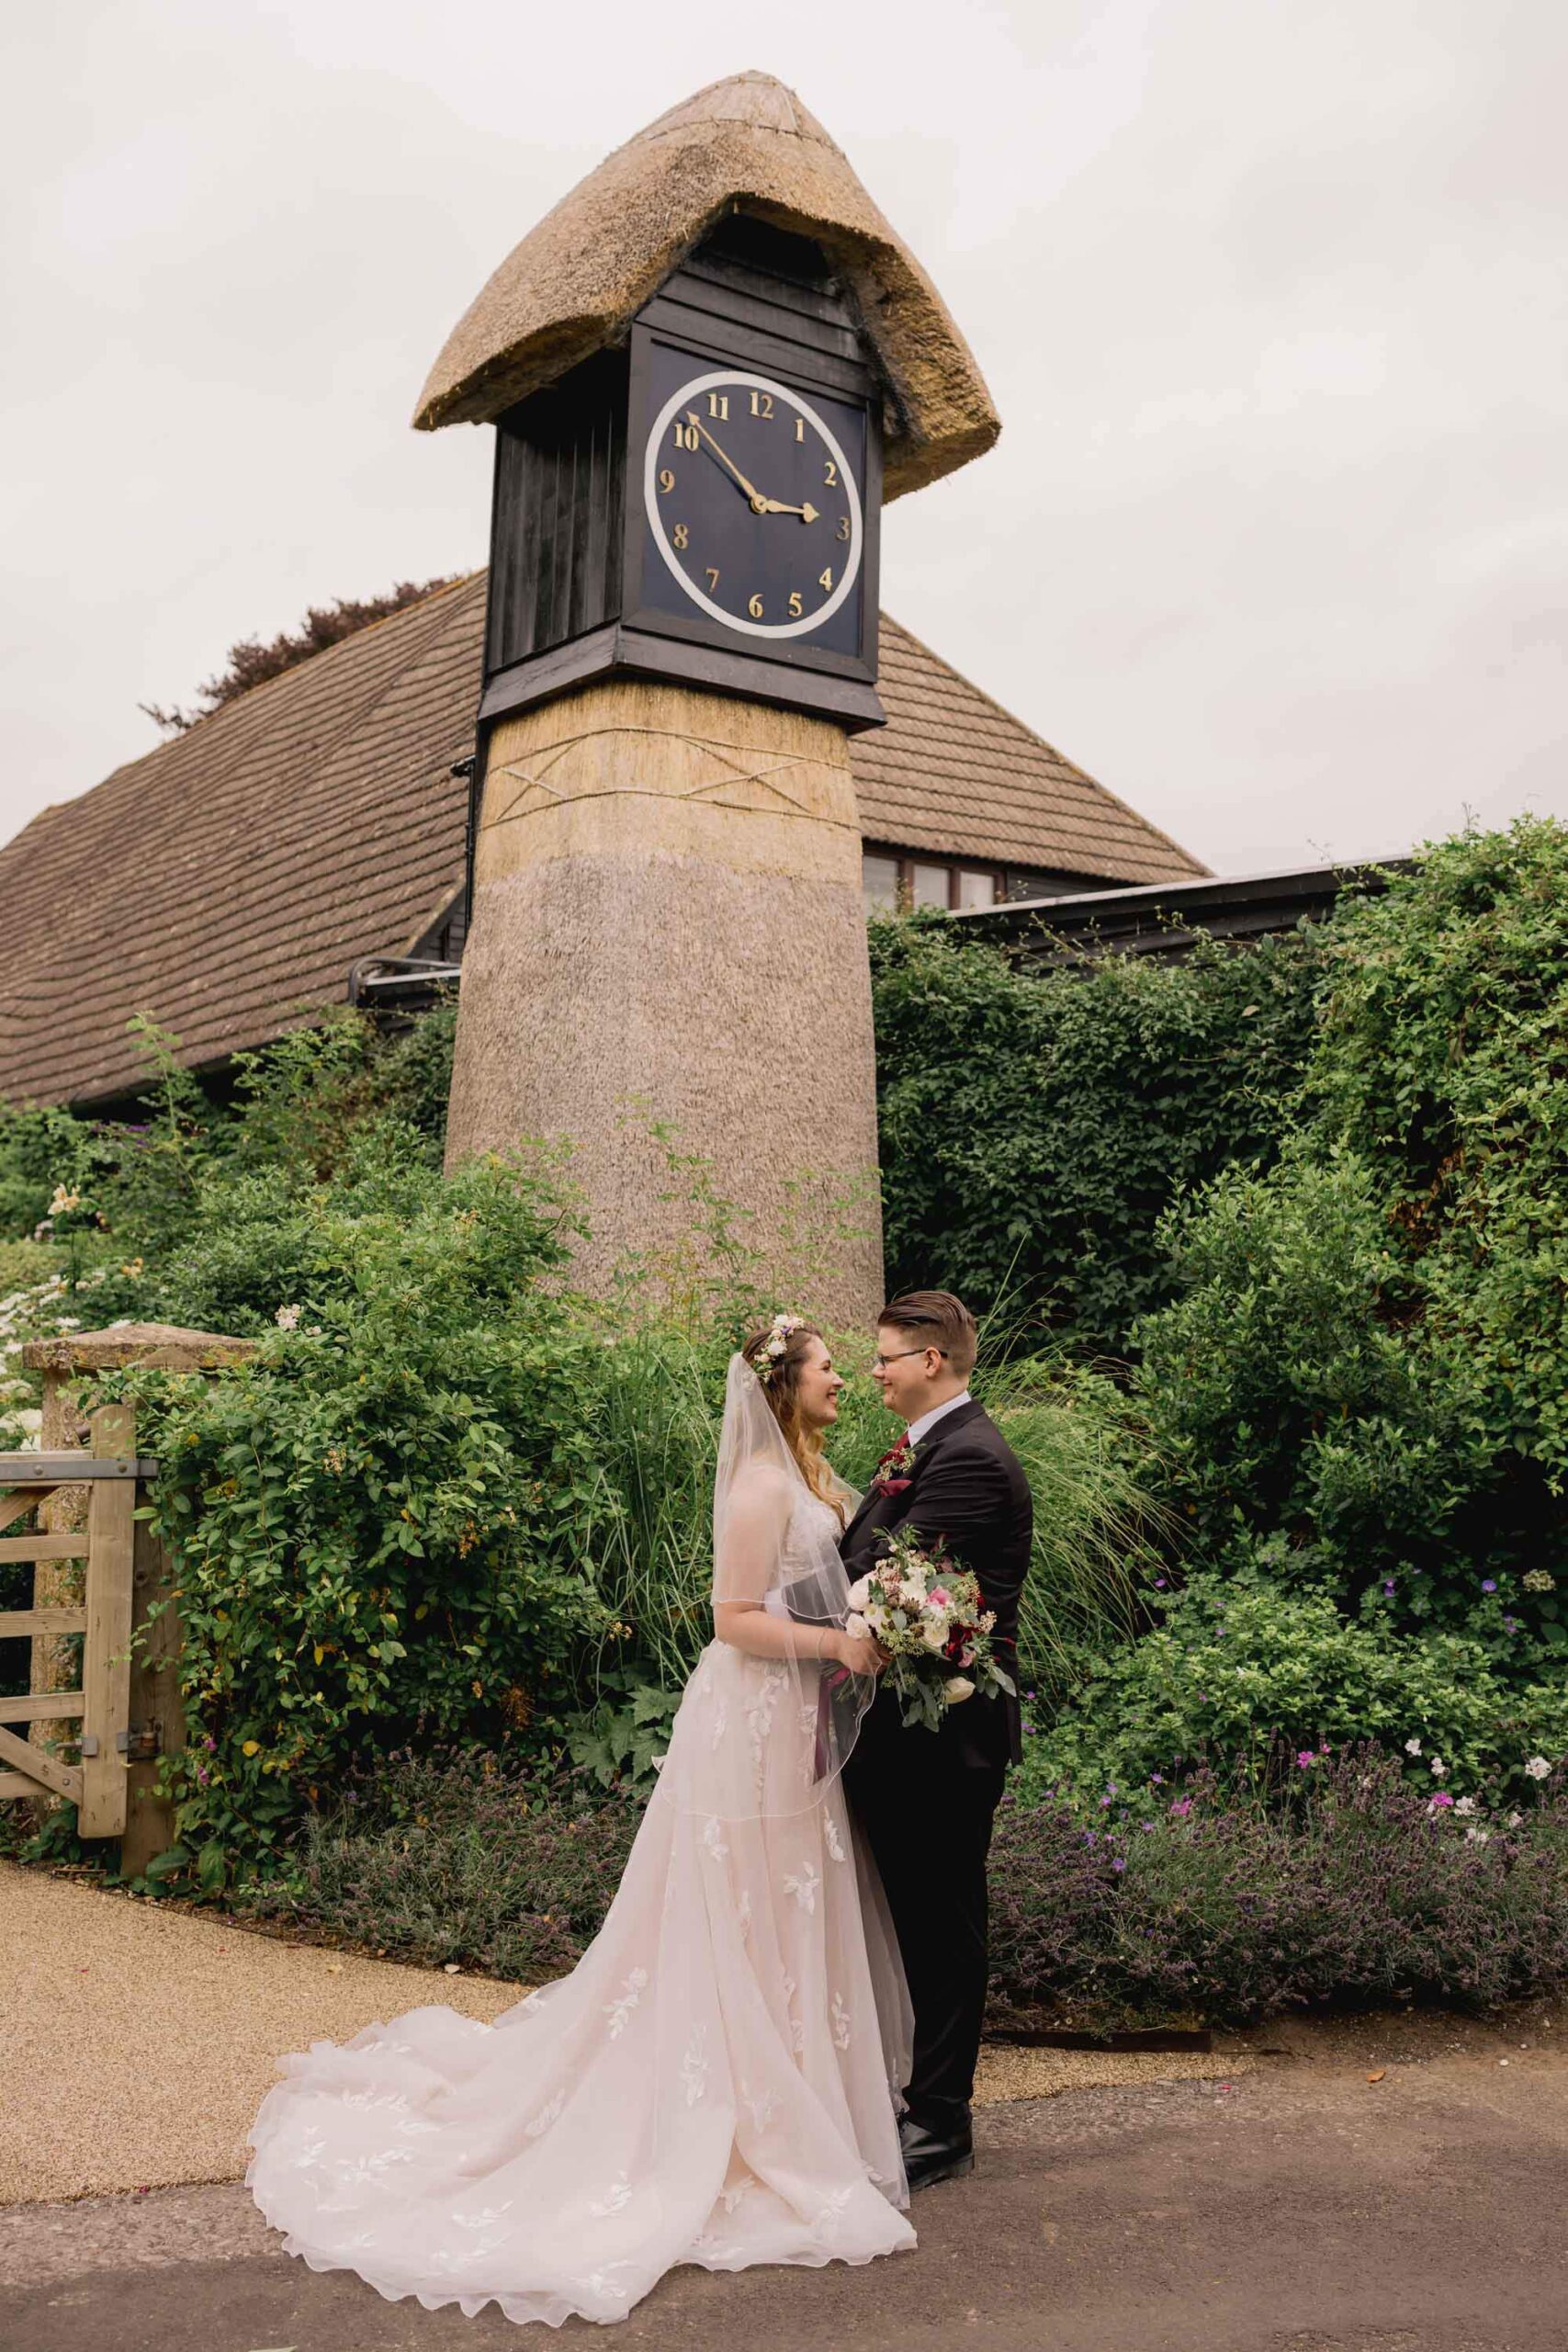 Bride and groom have a cuddle on their wedding day at the Clock Barn venue in Hampshire.